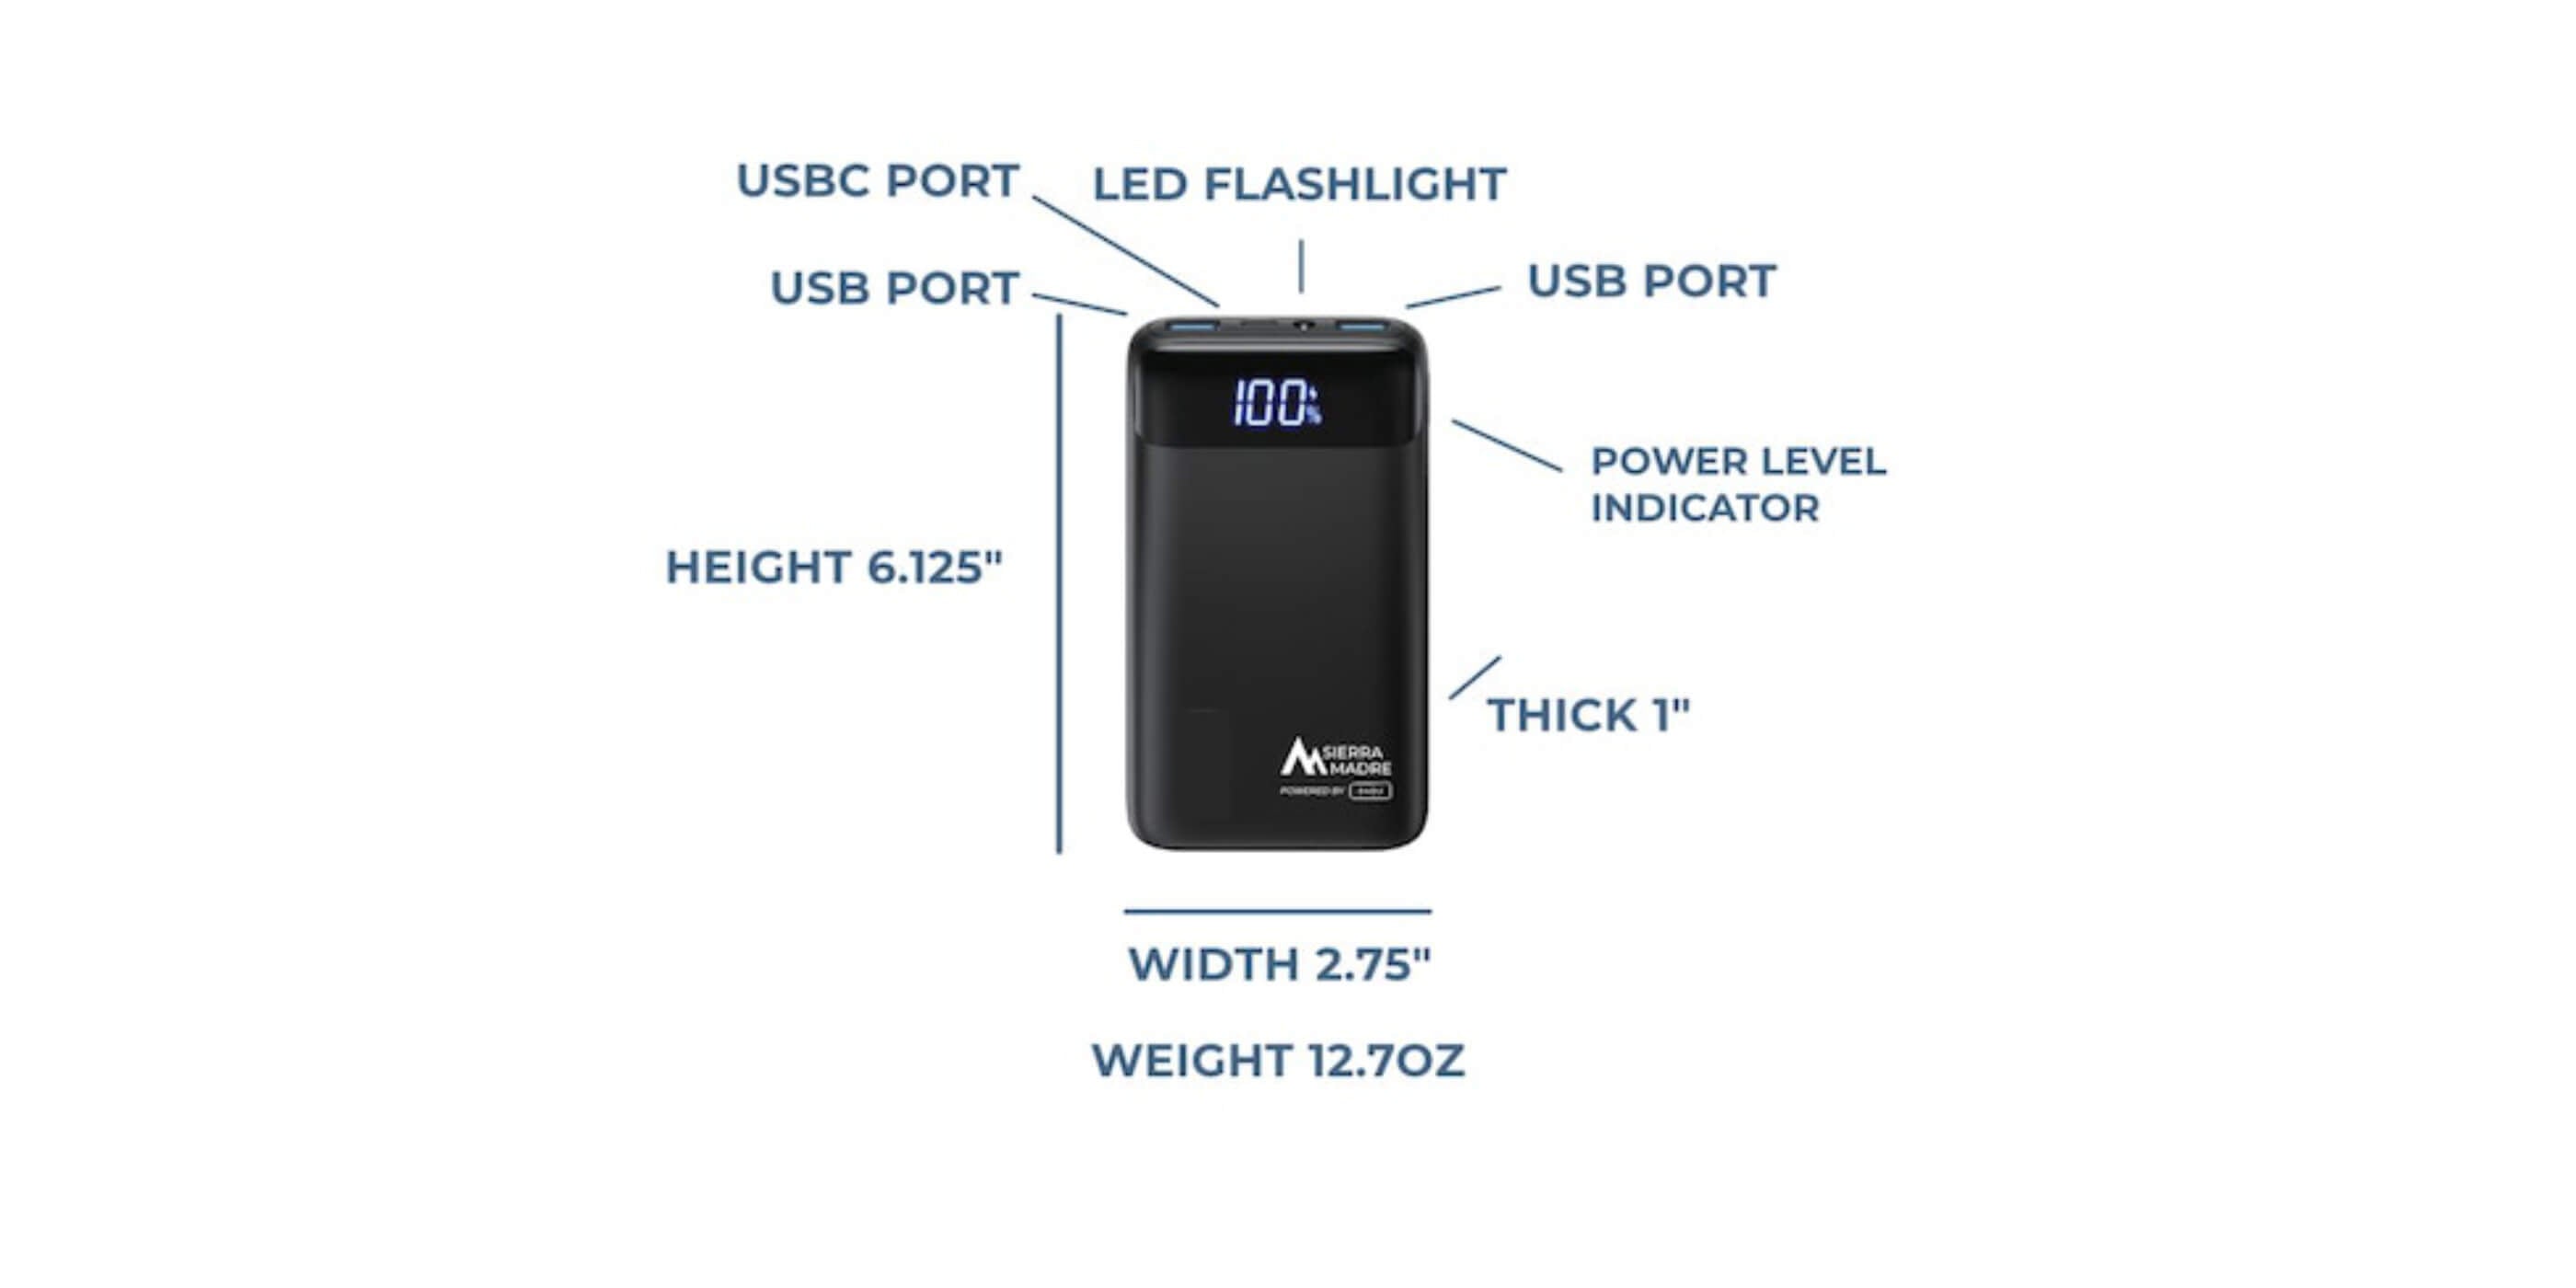 5kw Power Bank Station  Perfect for camping & staycations